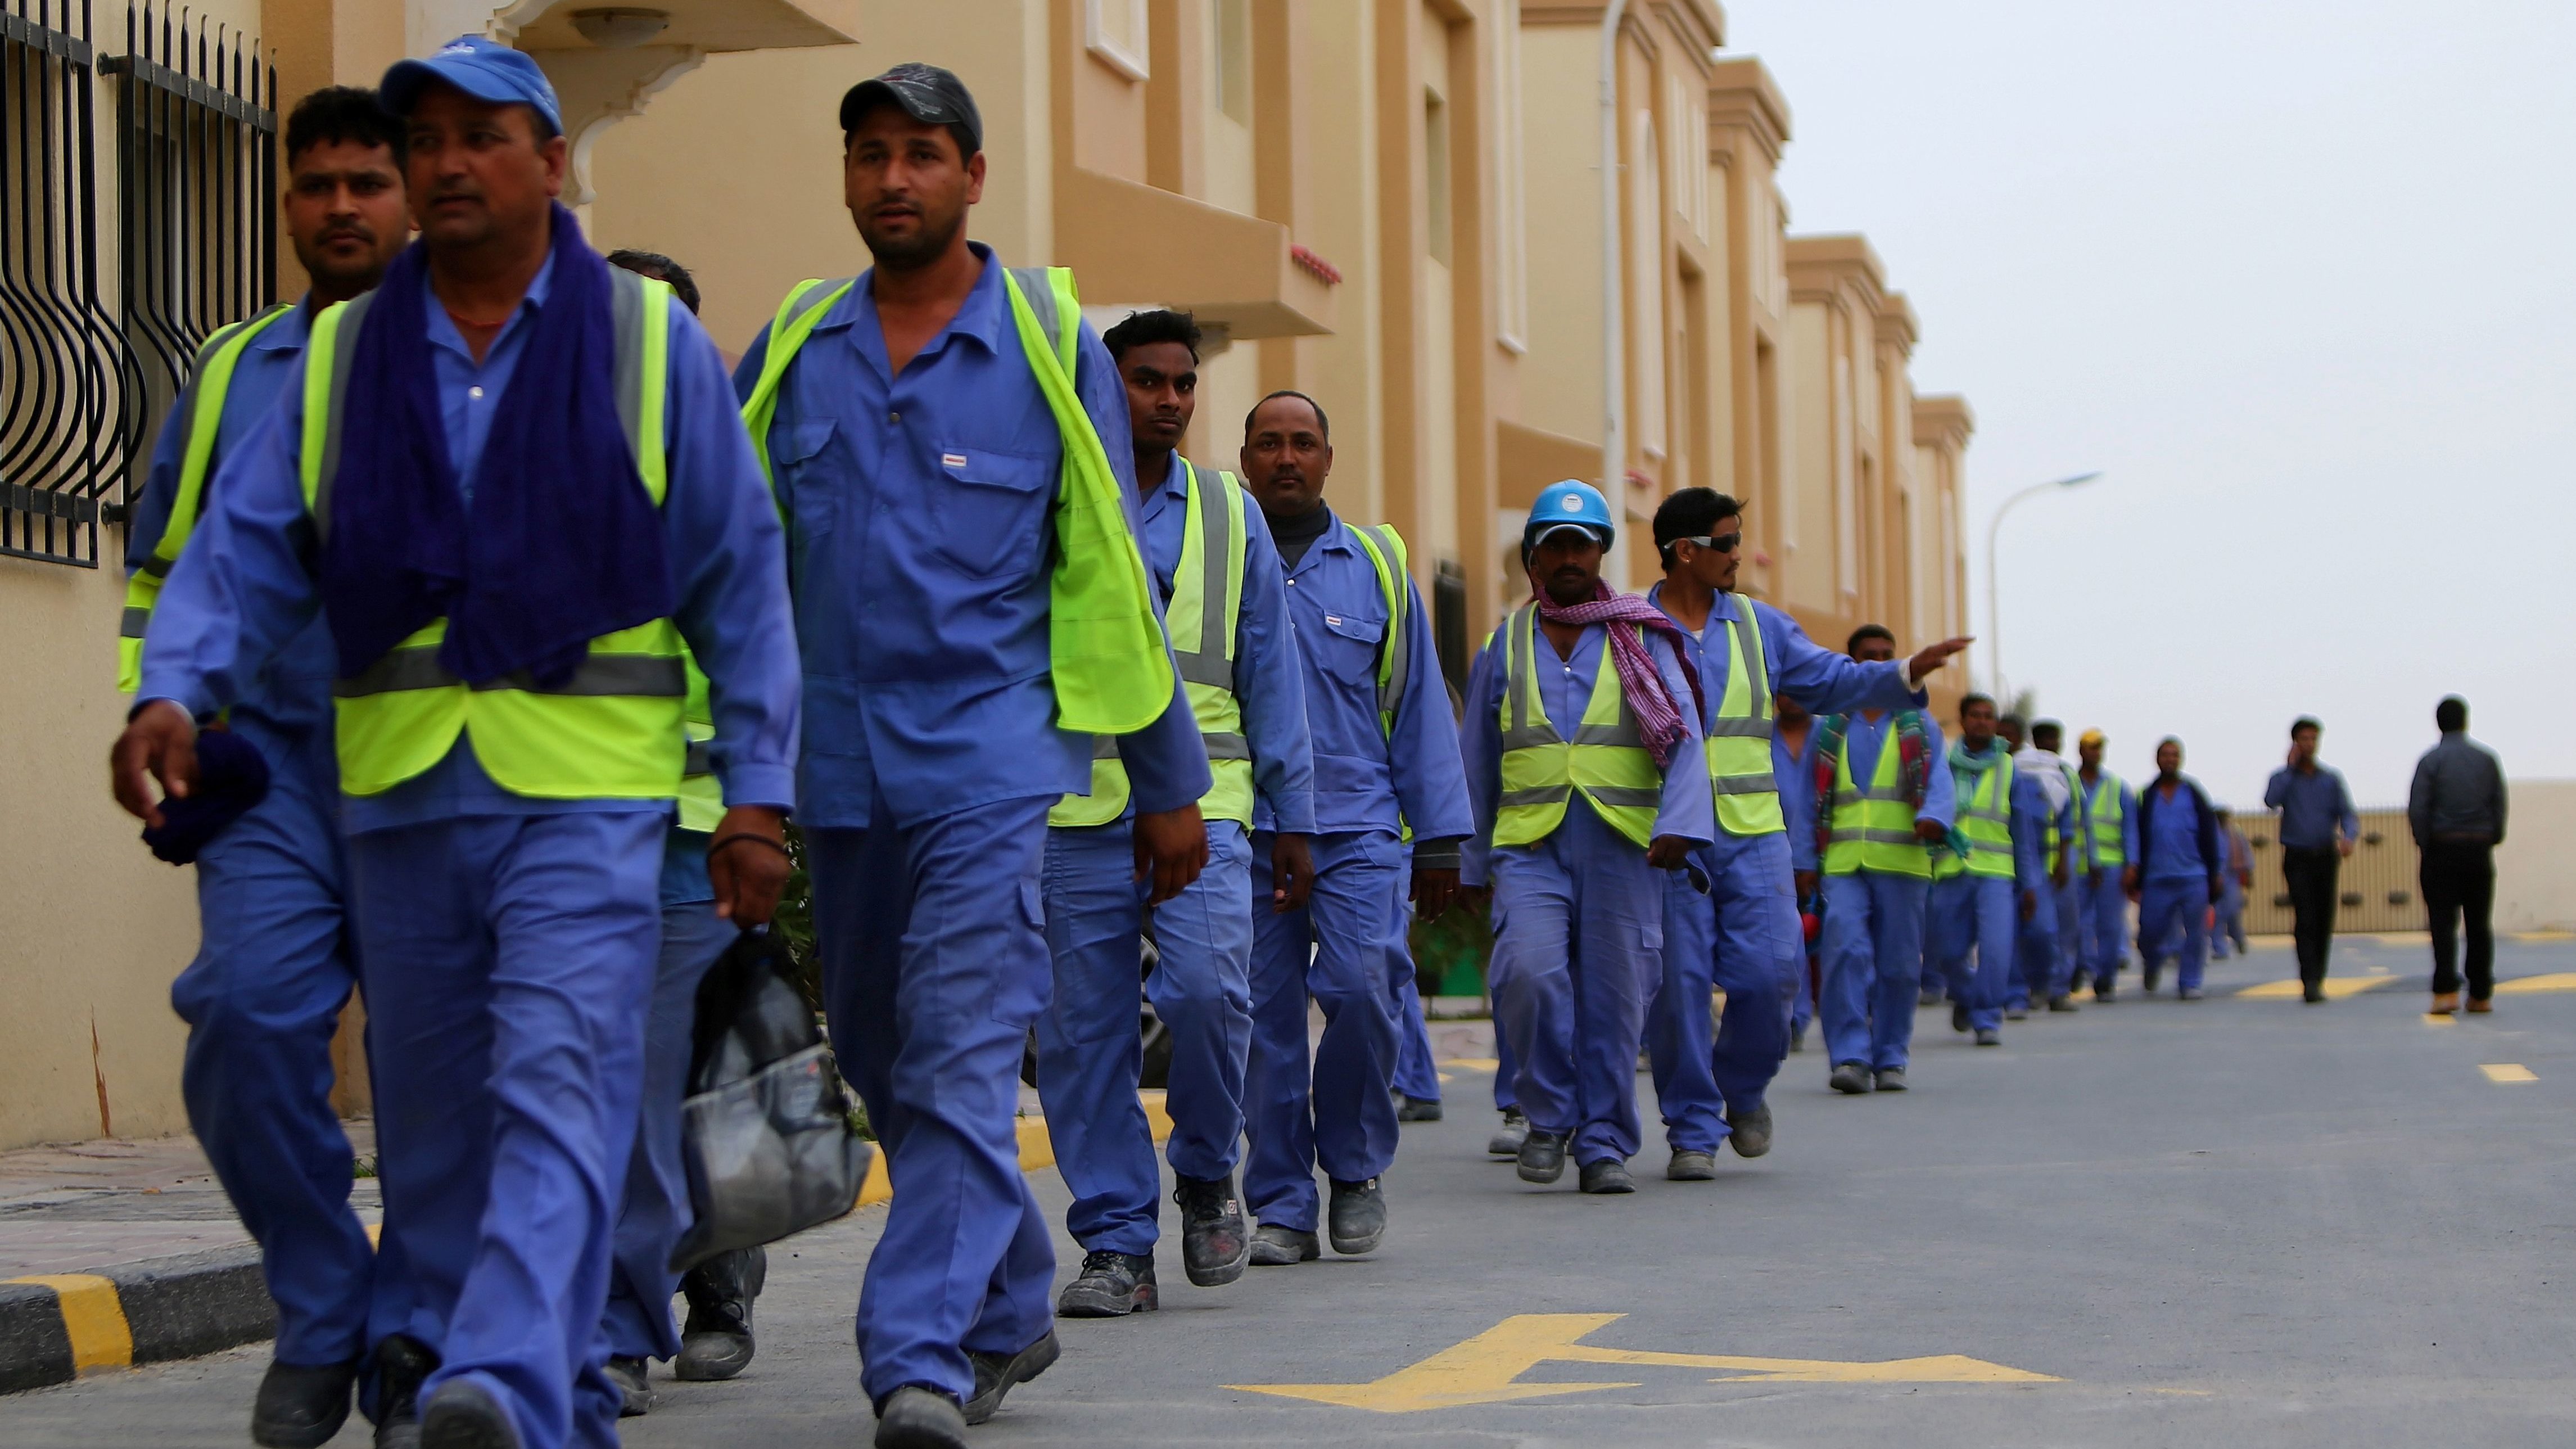 Report: Qatar Evicts Foreign Workers Ahead of World Cup